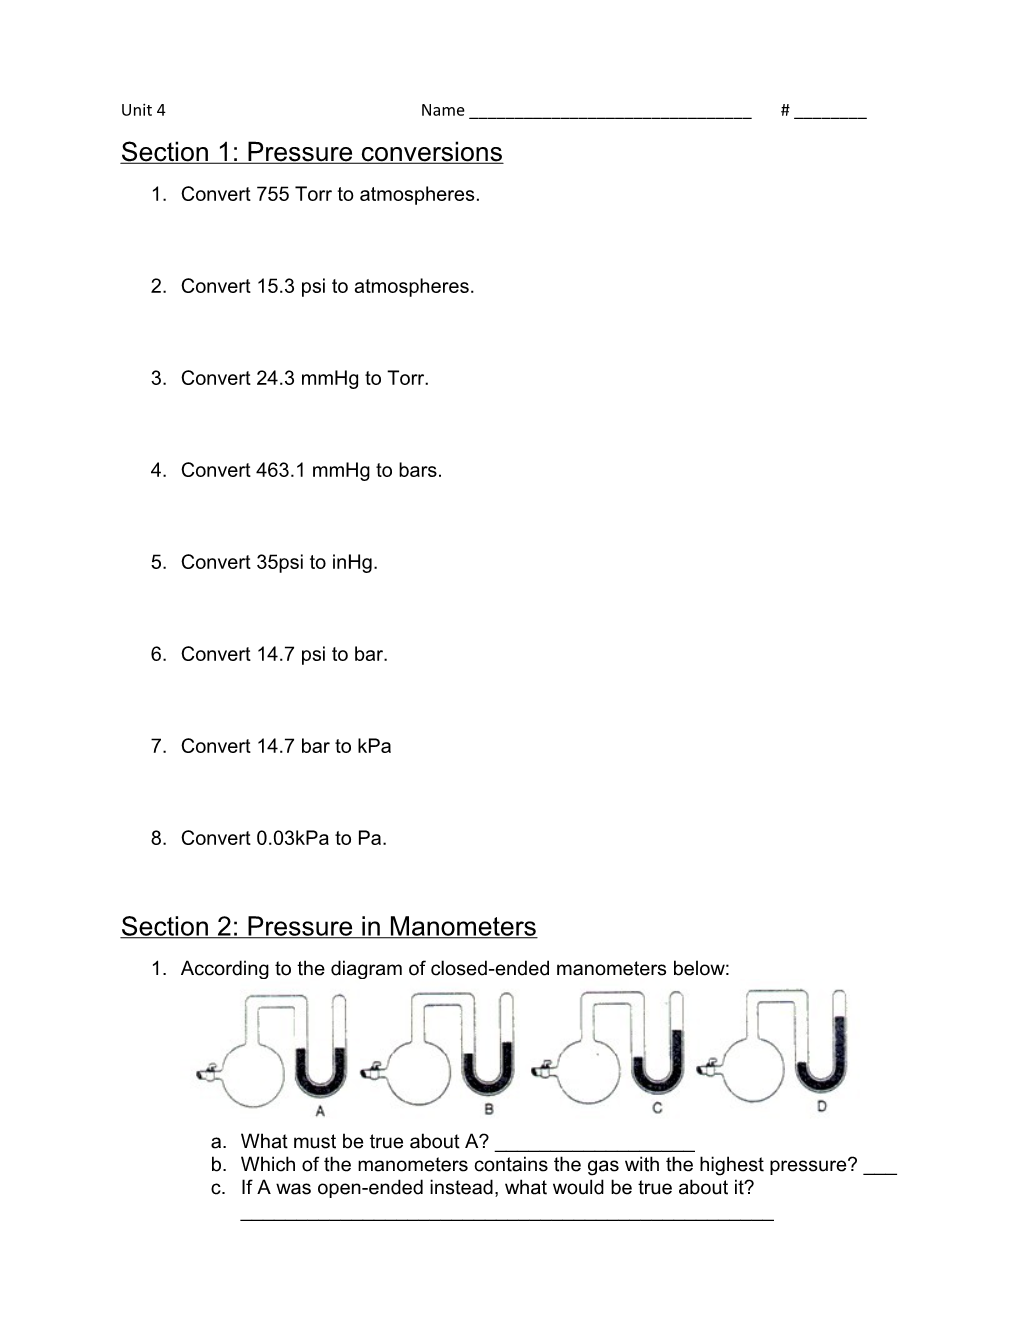 Section 1: Pressure Conversions